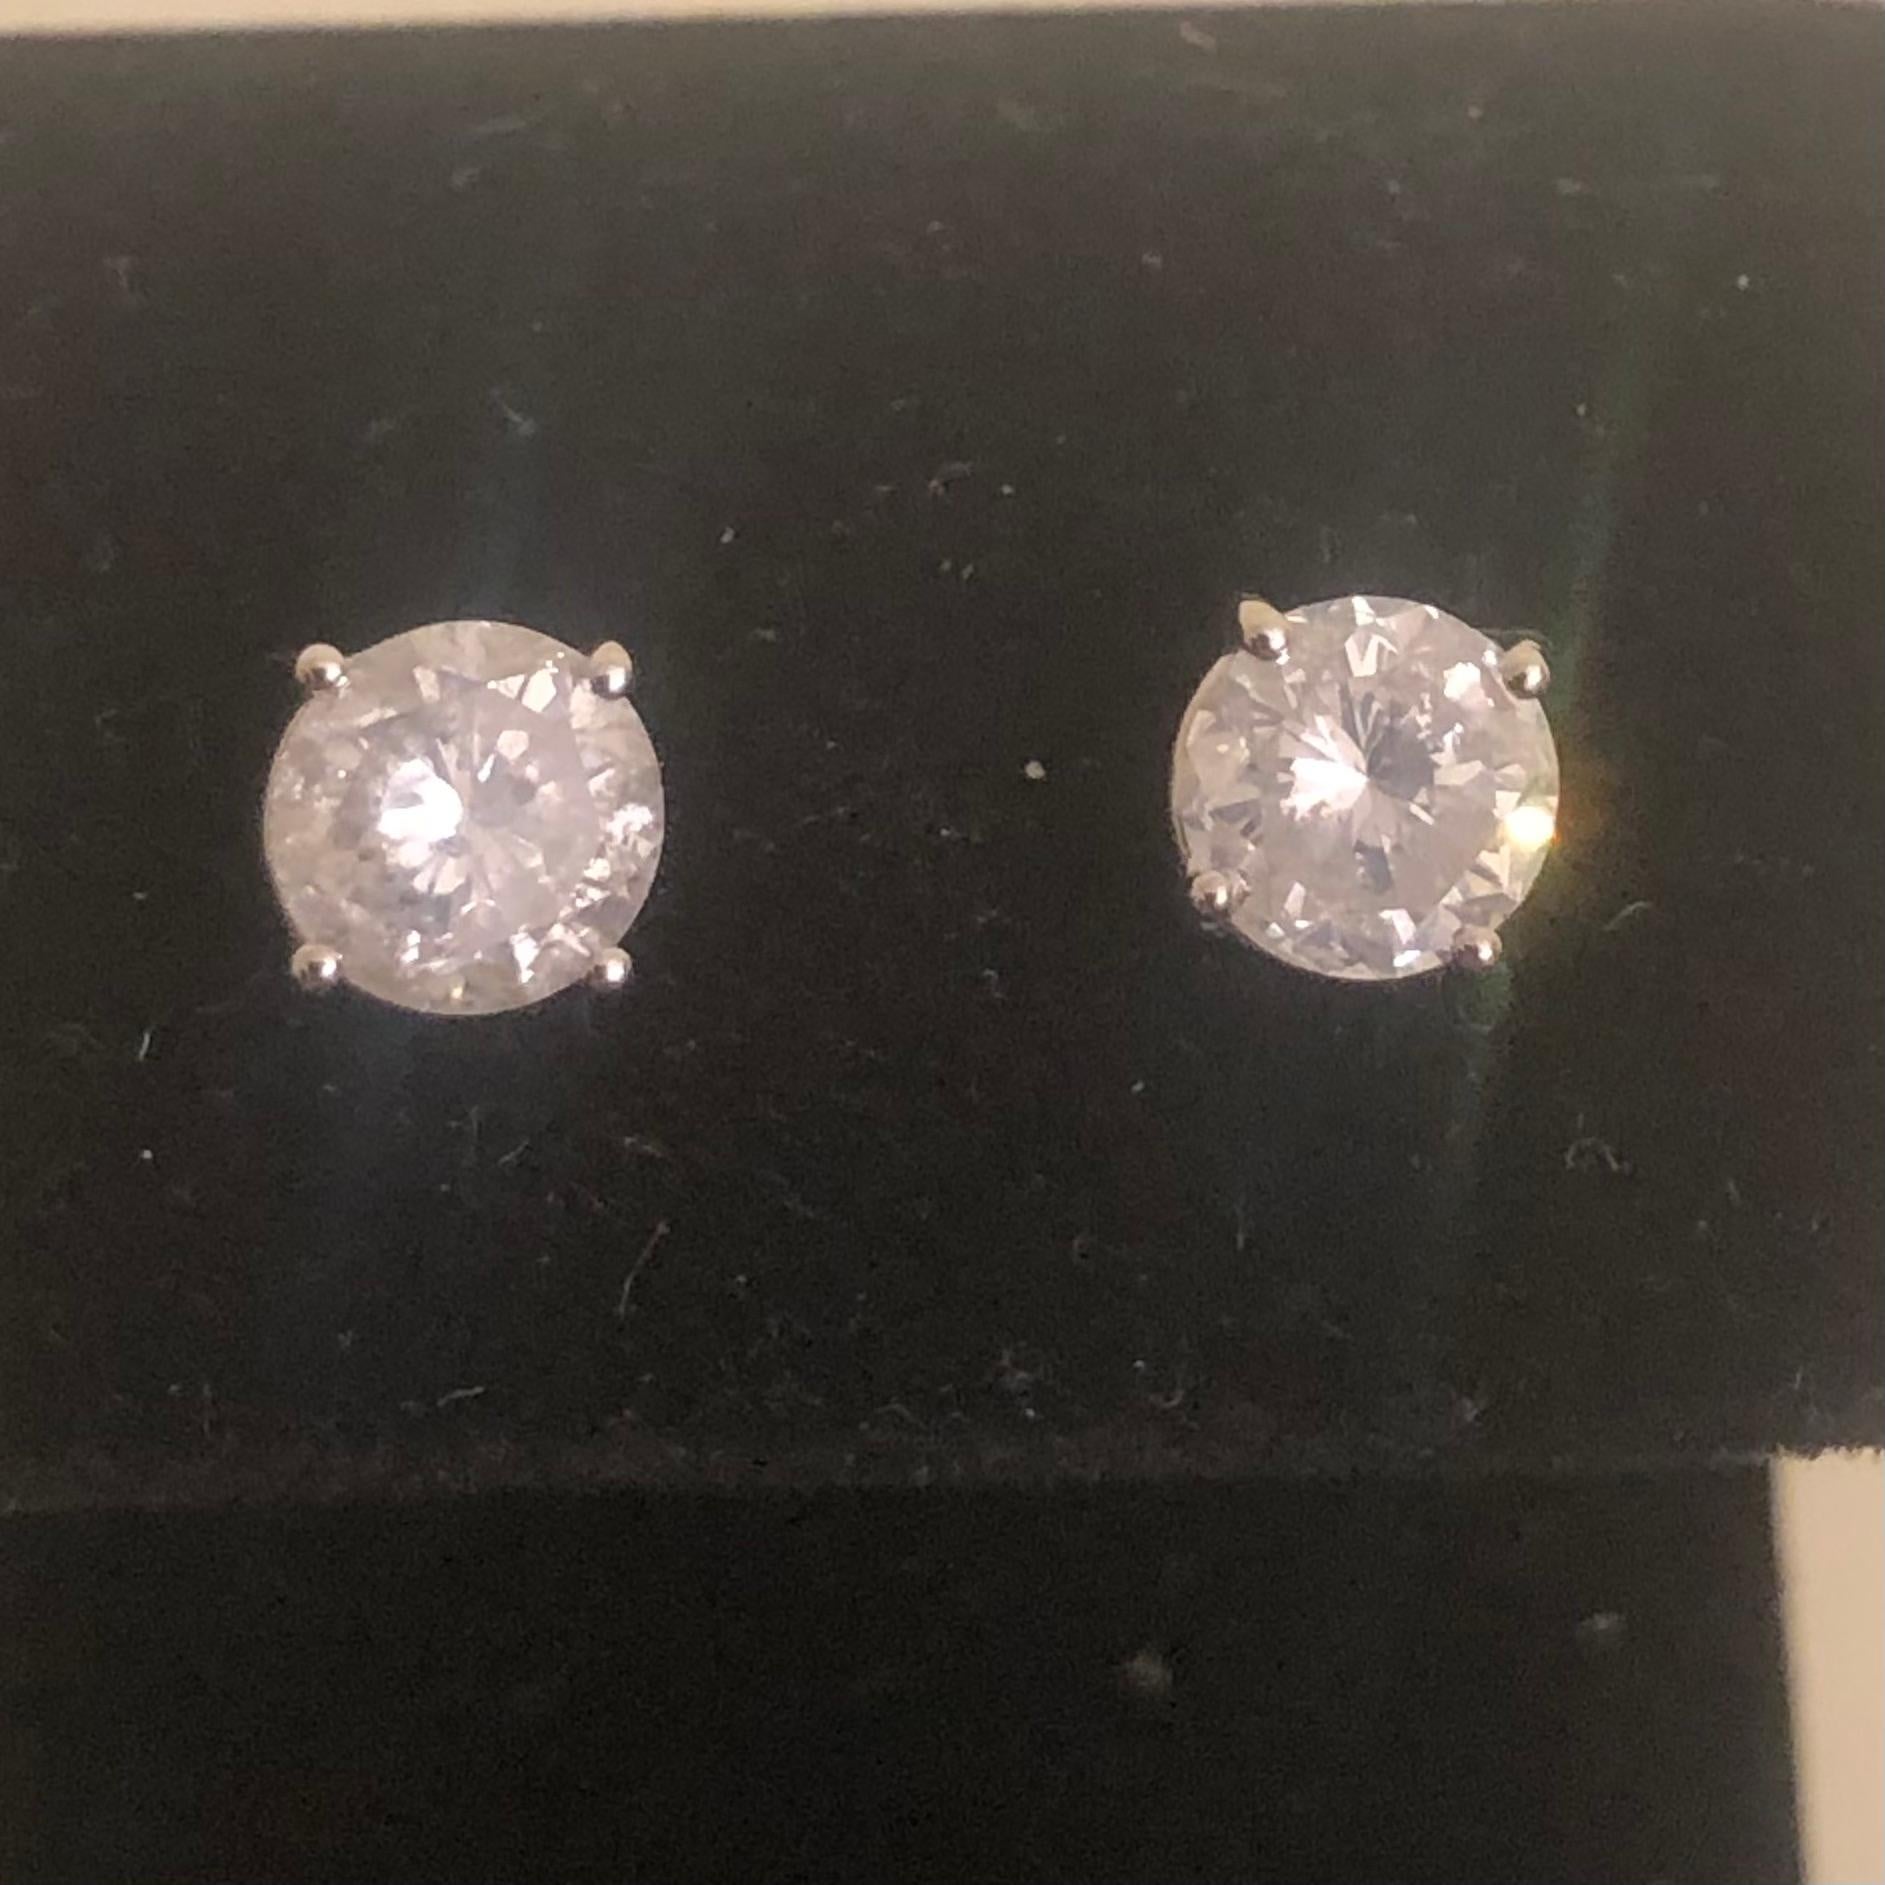 Stunning 2 Carat Brilliant Round Solitaire Diamond Stud Earrings in 14K White Gold. These natural diamond studs are certified with an appraisal report value of $8,850.00.

A large center 1 carat plus solitaire diamond (size of an engagement ring) is